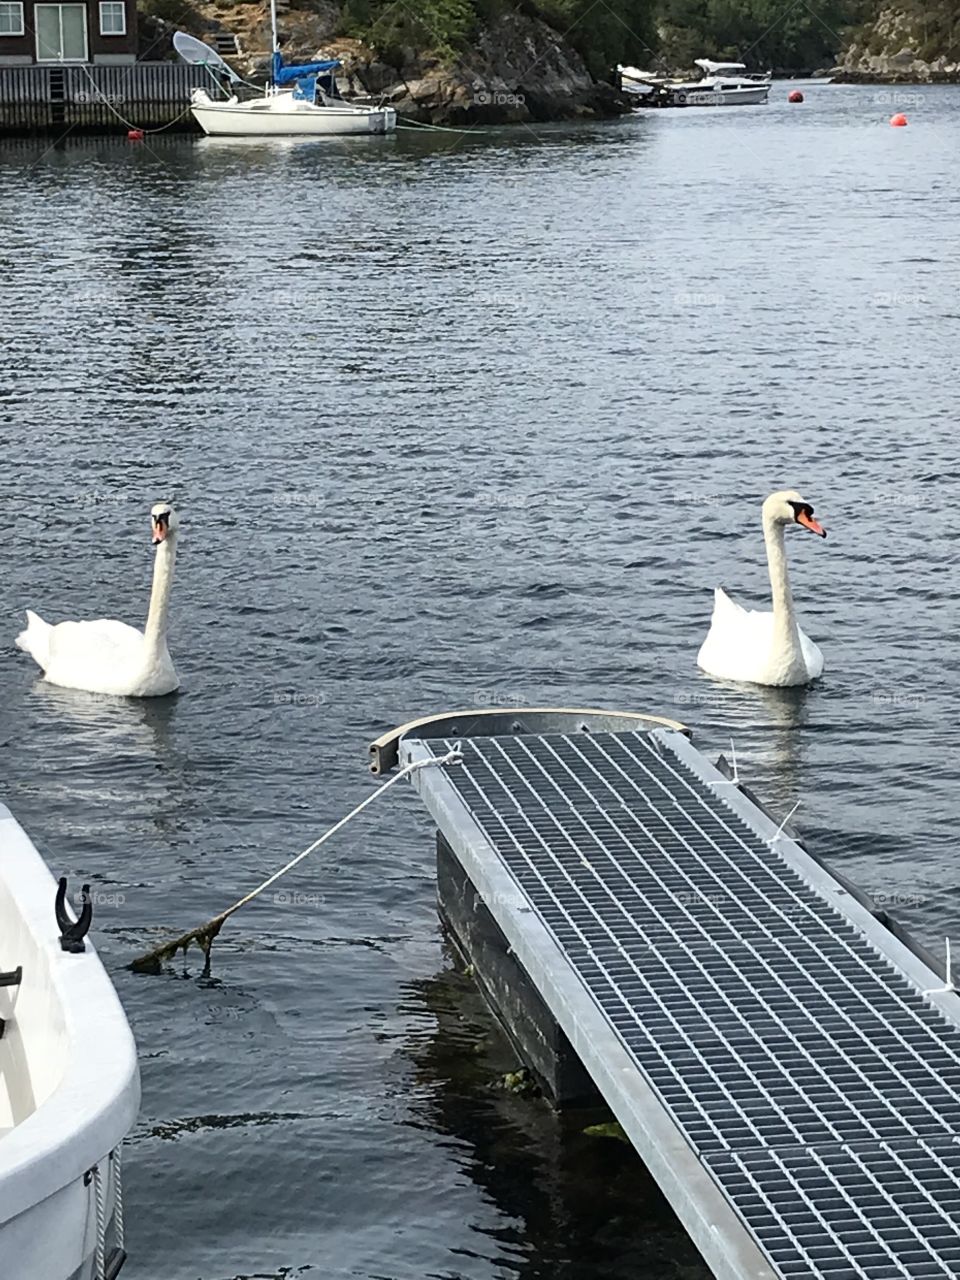 Two swans swimming around in the sea in Norway. The swans is both white and have have orange nebs.